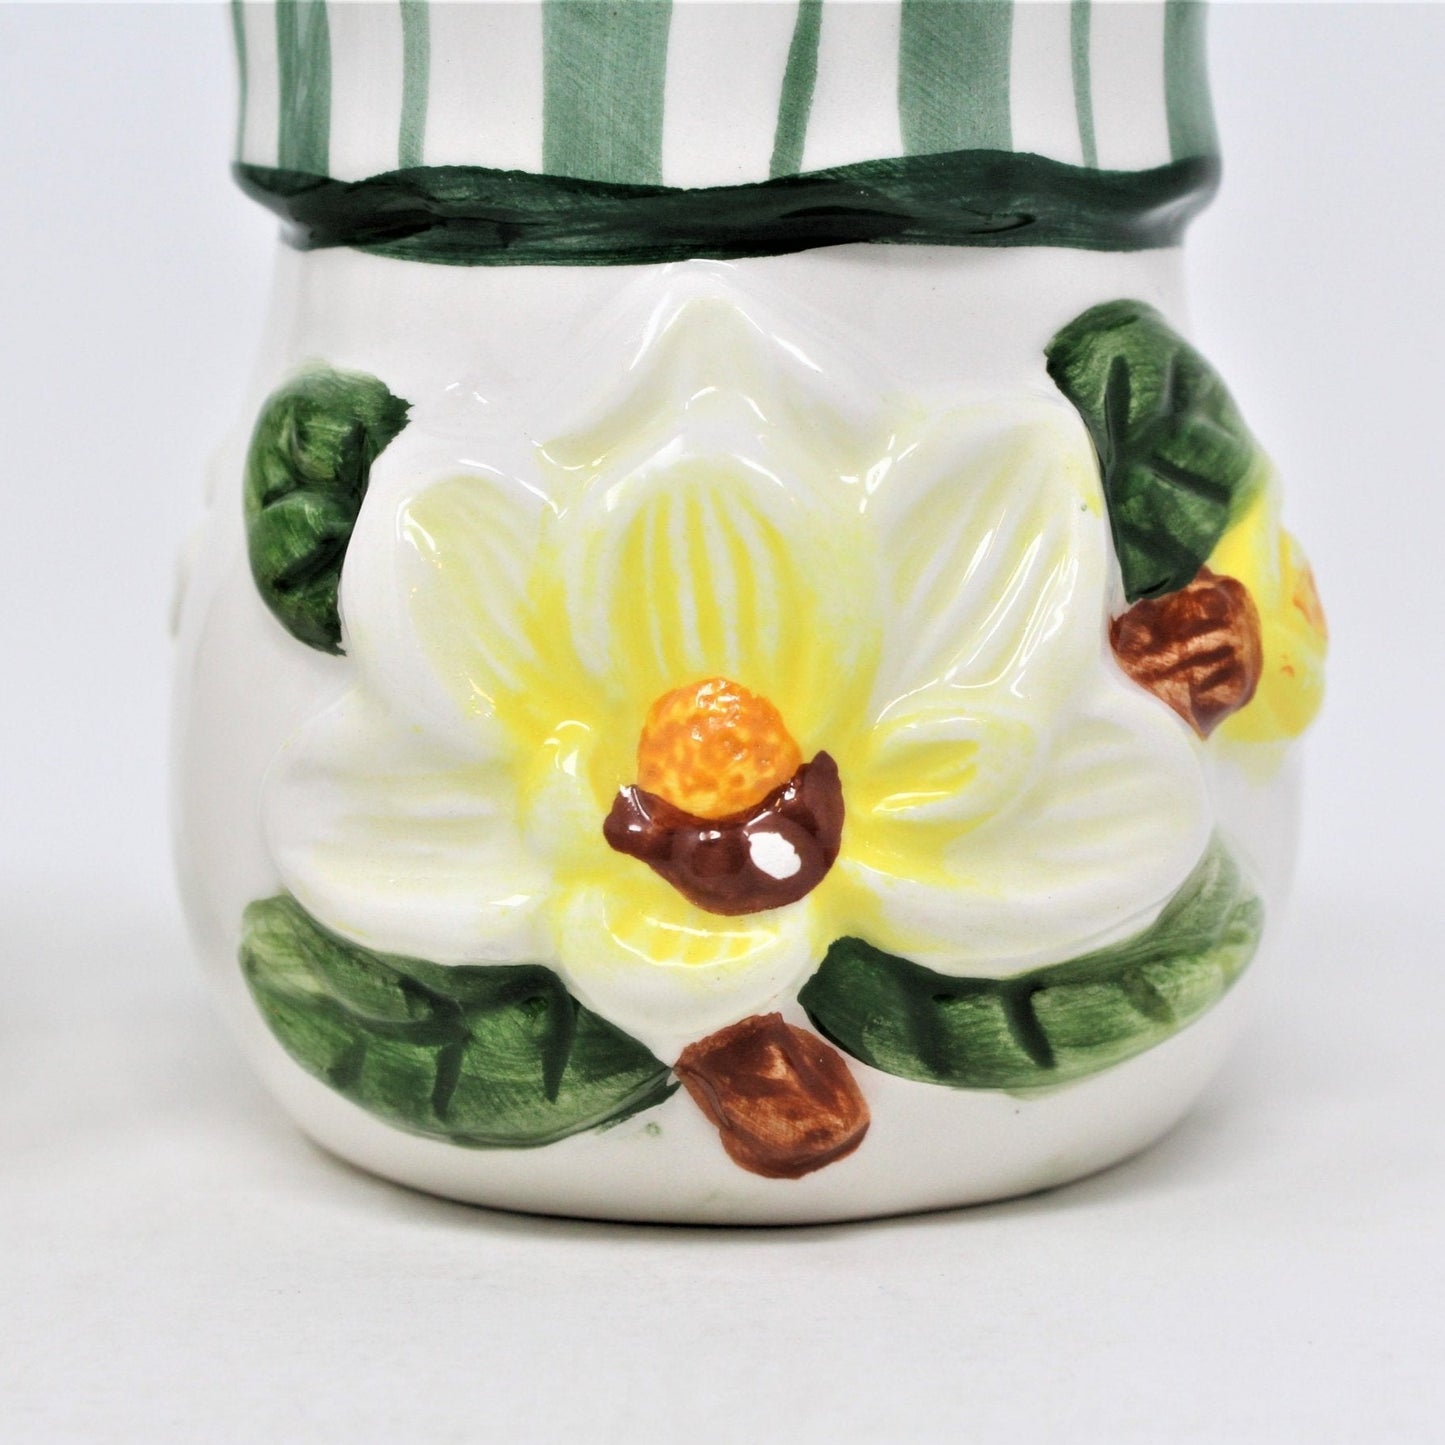 Salt and Pepper Shakers, Young's China, Magnolia and Bows, Ceramic 1996